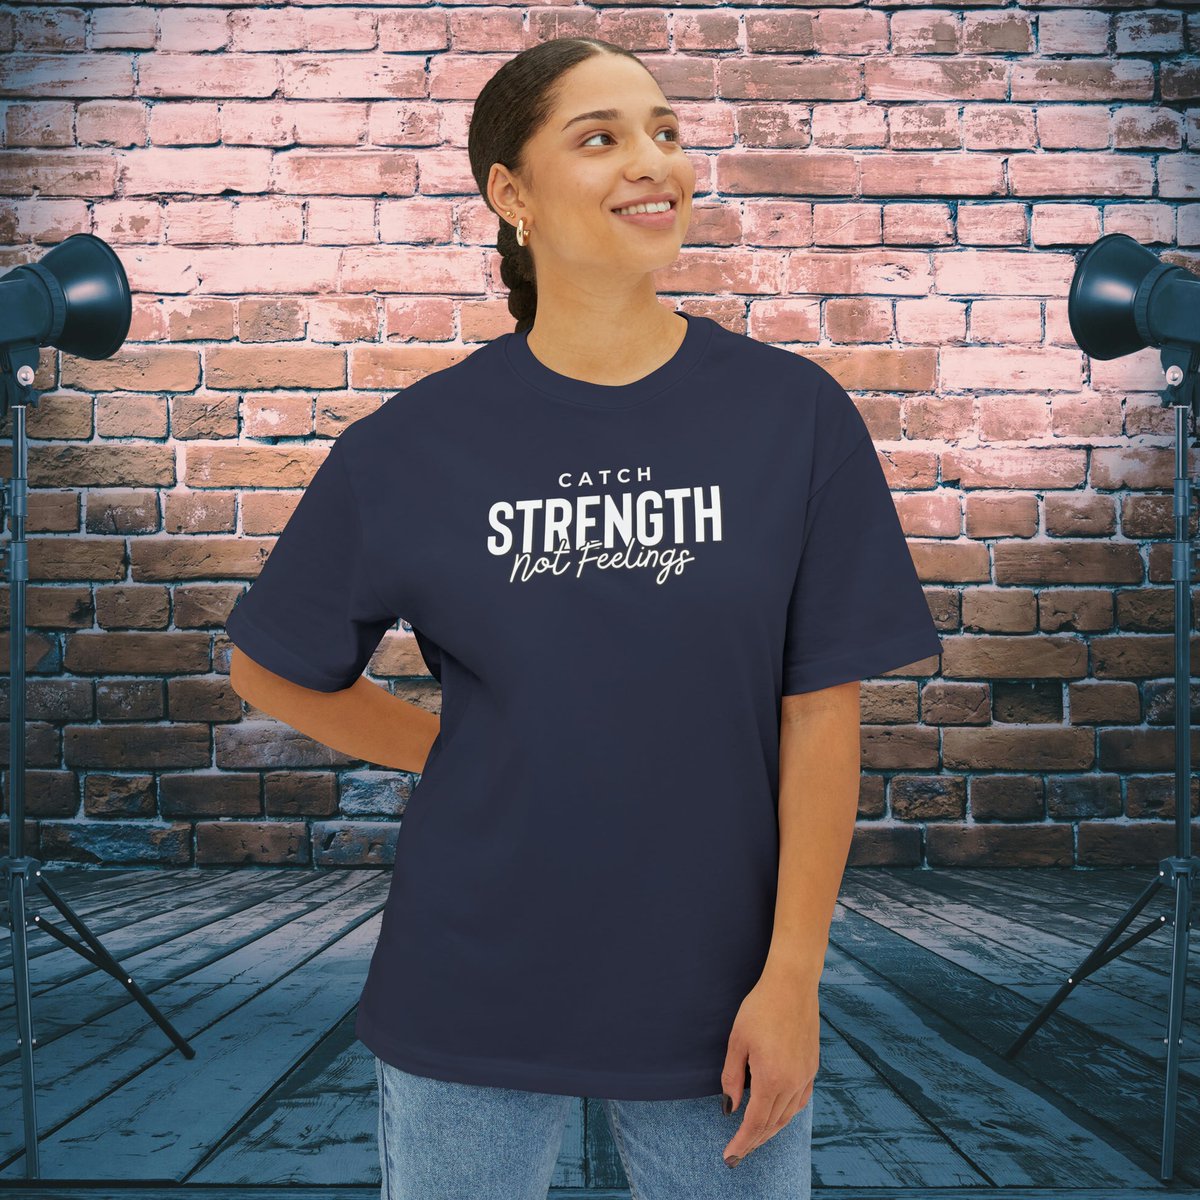 Show your love for strength with our 'Catch Strength Not Feelings' Oversized Boxy T-shirt. Comfort meets empowerment in this unique and stylish tee. #StrengthStatement #OversizedStyle #CatchStrength
personalizeittoledo.com/products/catch…